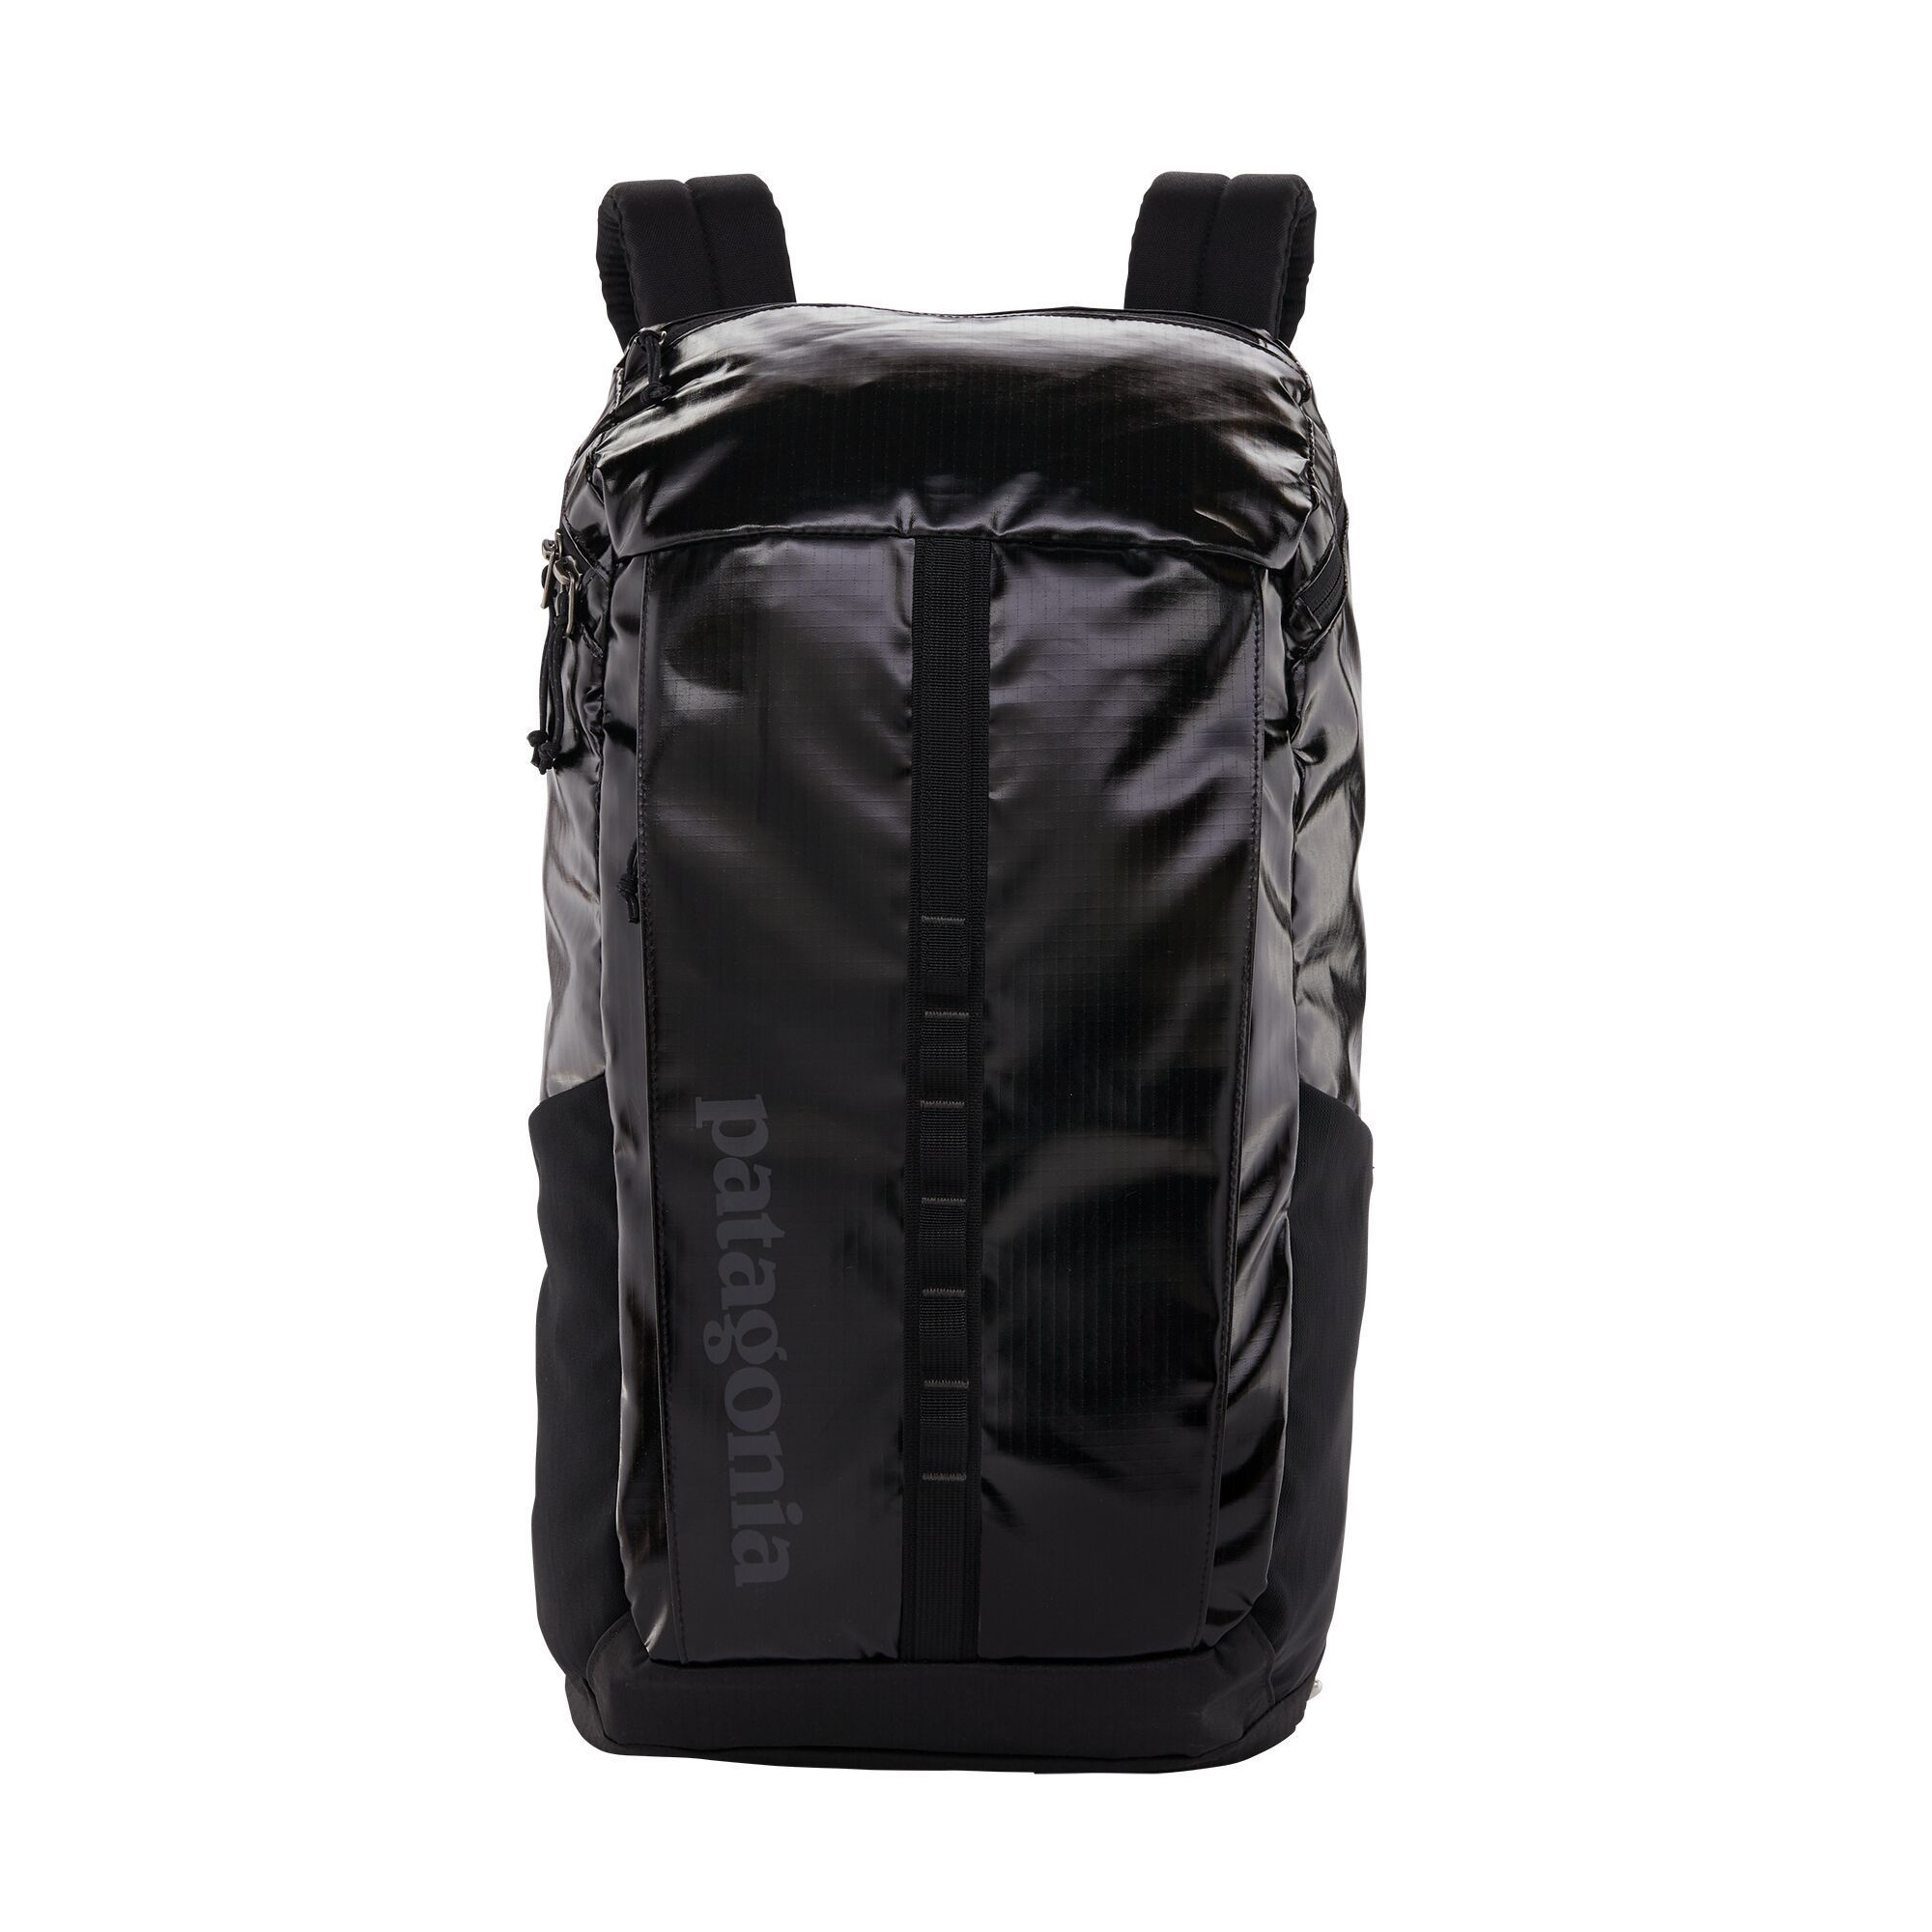 Patagonia Black Hole Pack 25L - Backpack made from Recycled Polyester, Black